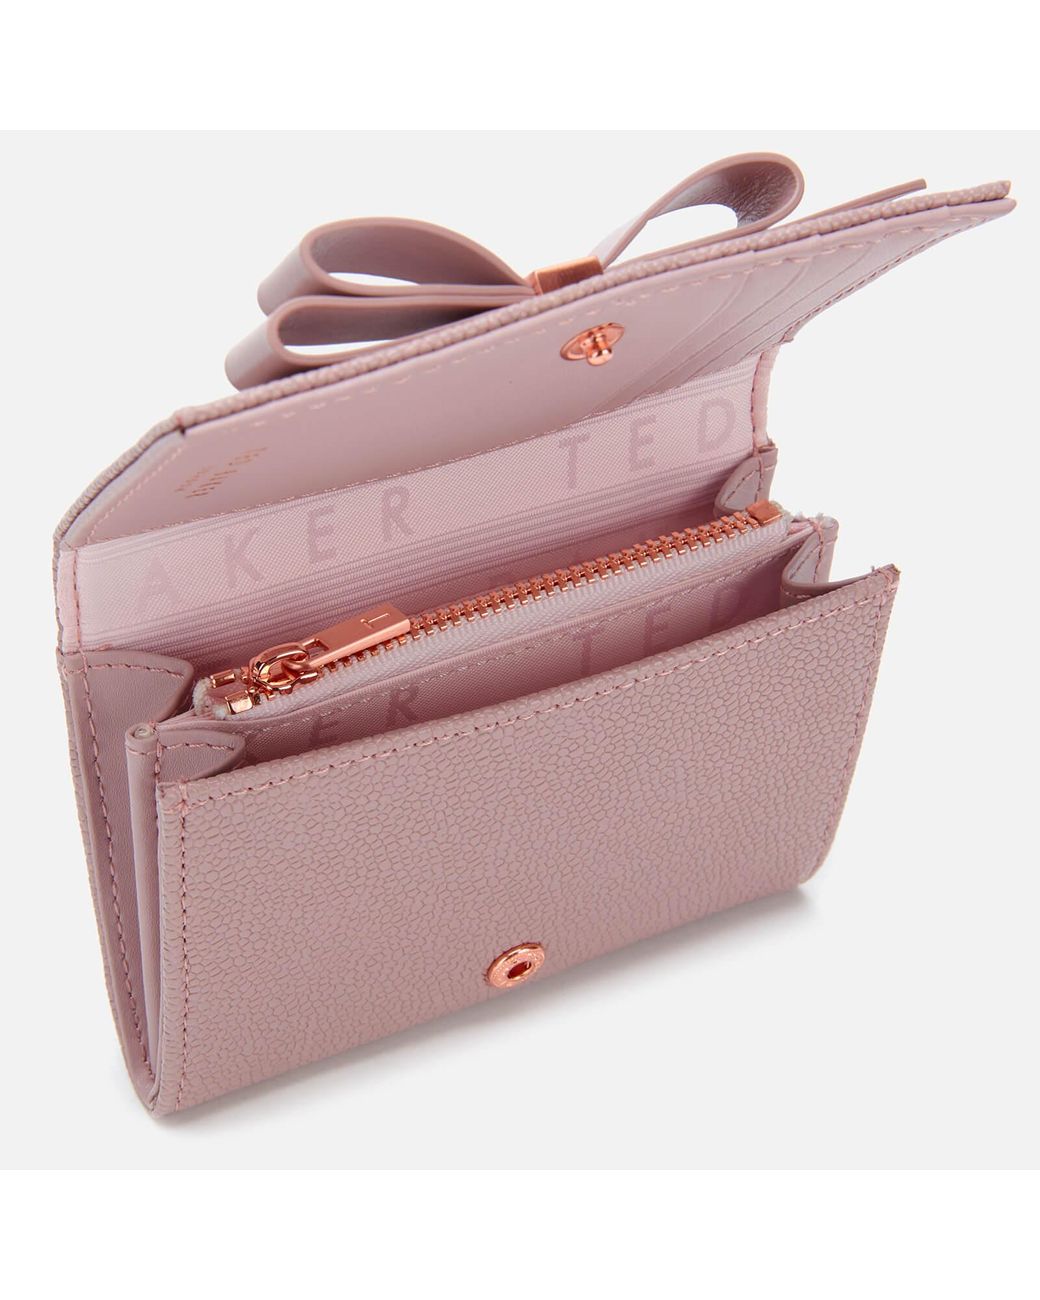 BARAN - PL-PINK | Purses & Card Holders | Ted Baker ROW